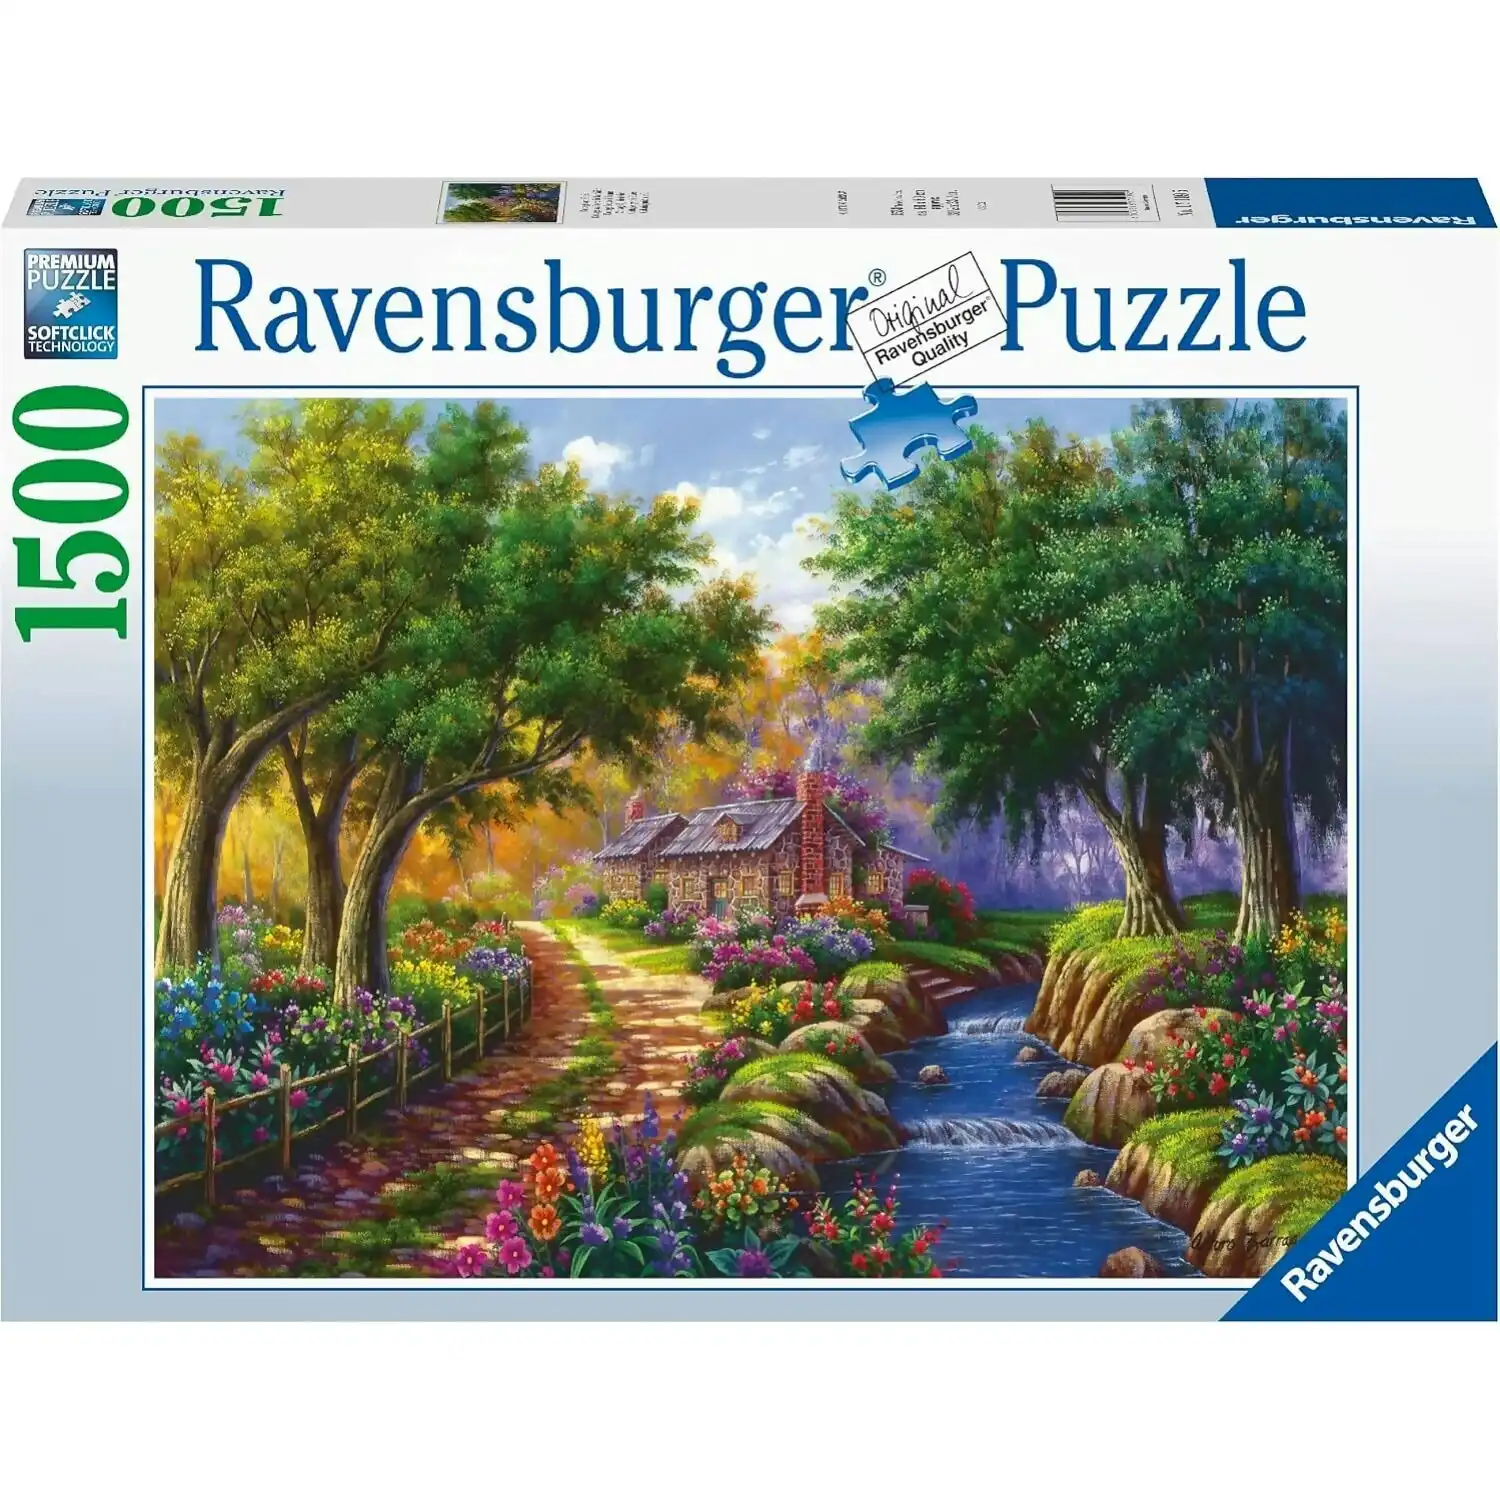 Ravensburger - Cottage By The River Jigsaw Puzzle 1500pc